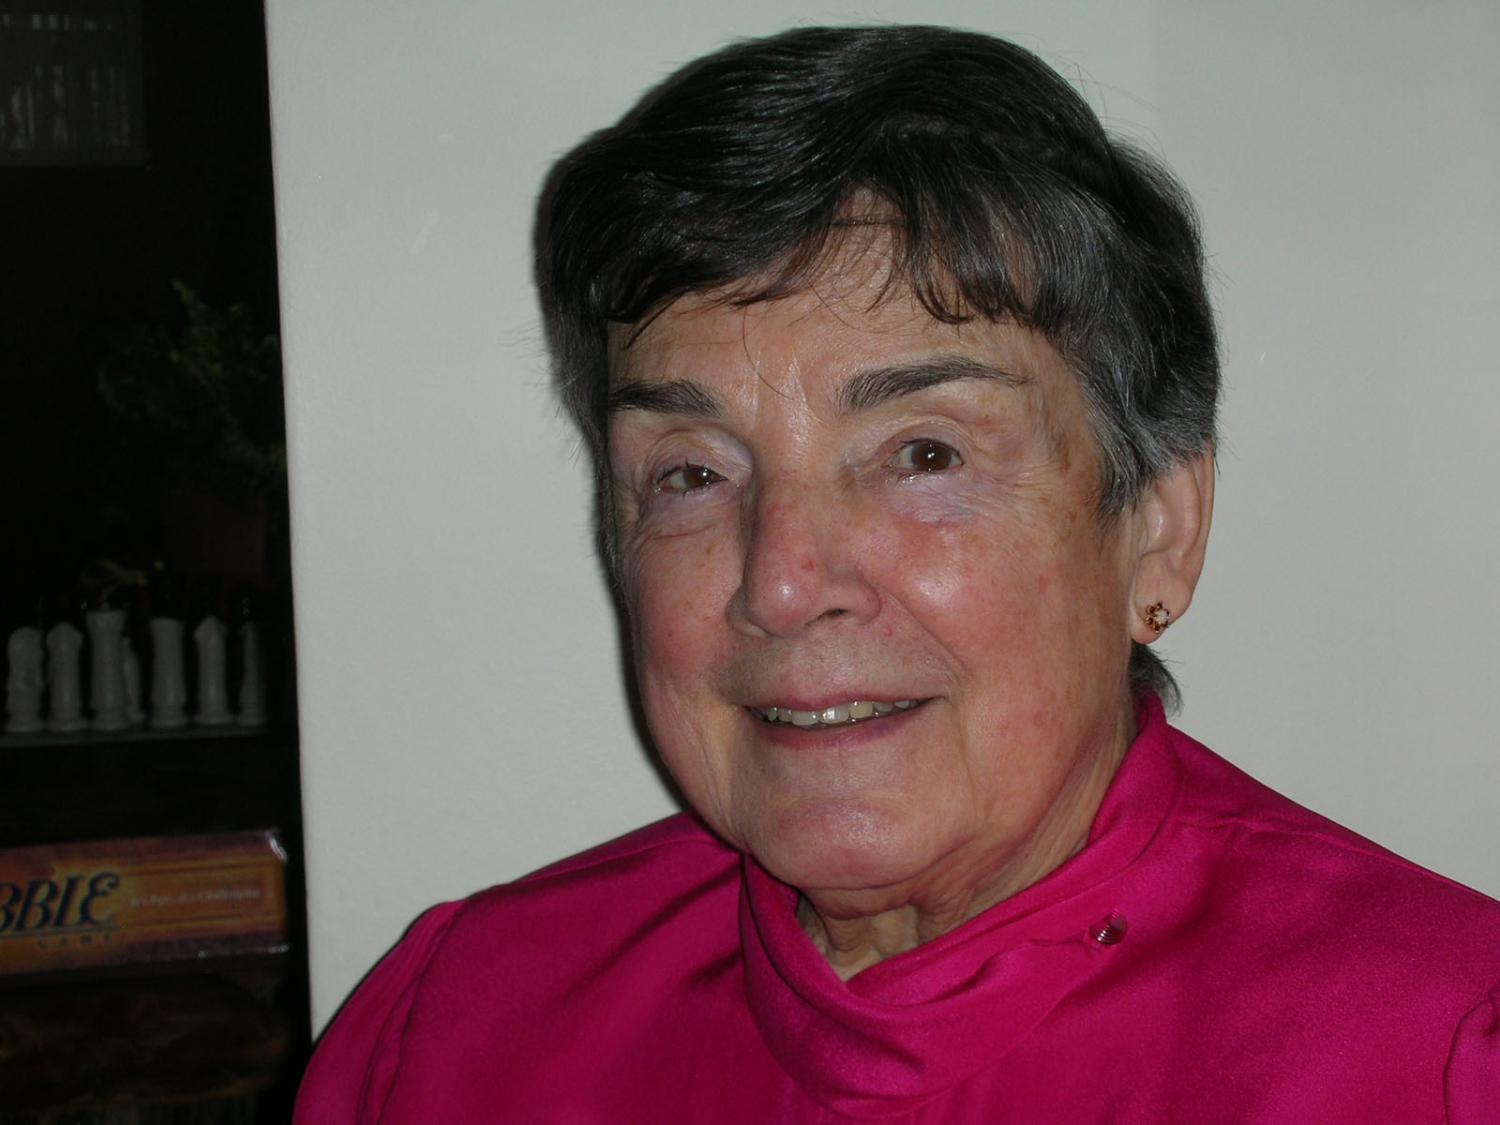 An elderly white woman with dark grey hair and brown eyes, wearing a magenta top and stud earrings, smiling